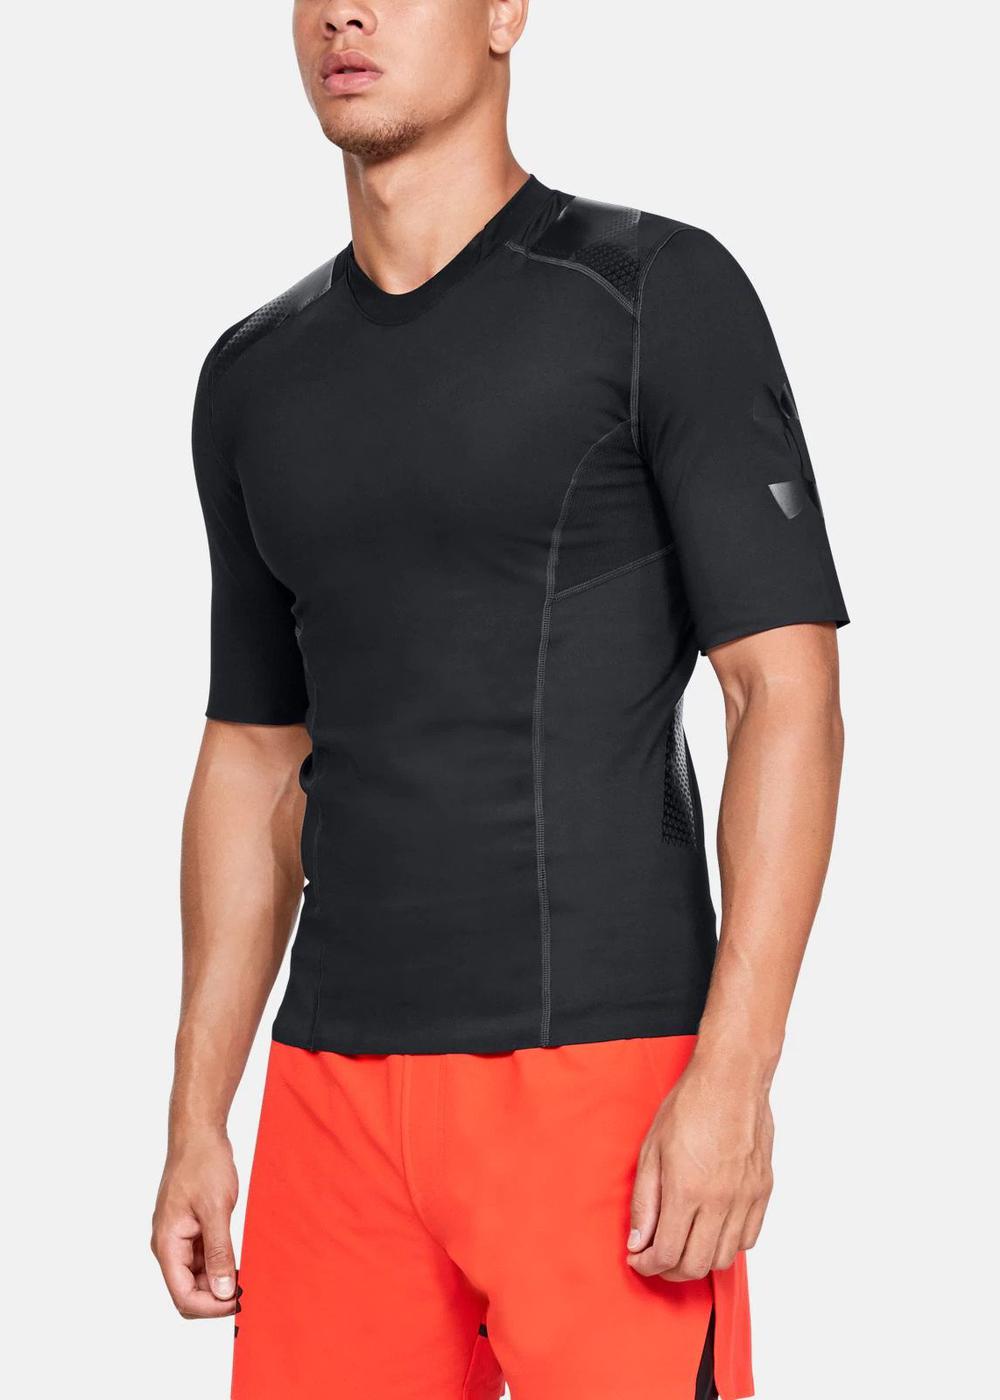 Under Armour - Similar stores, new products, store review, Q&A | Modvisor